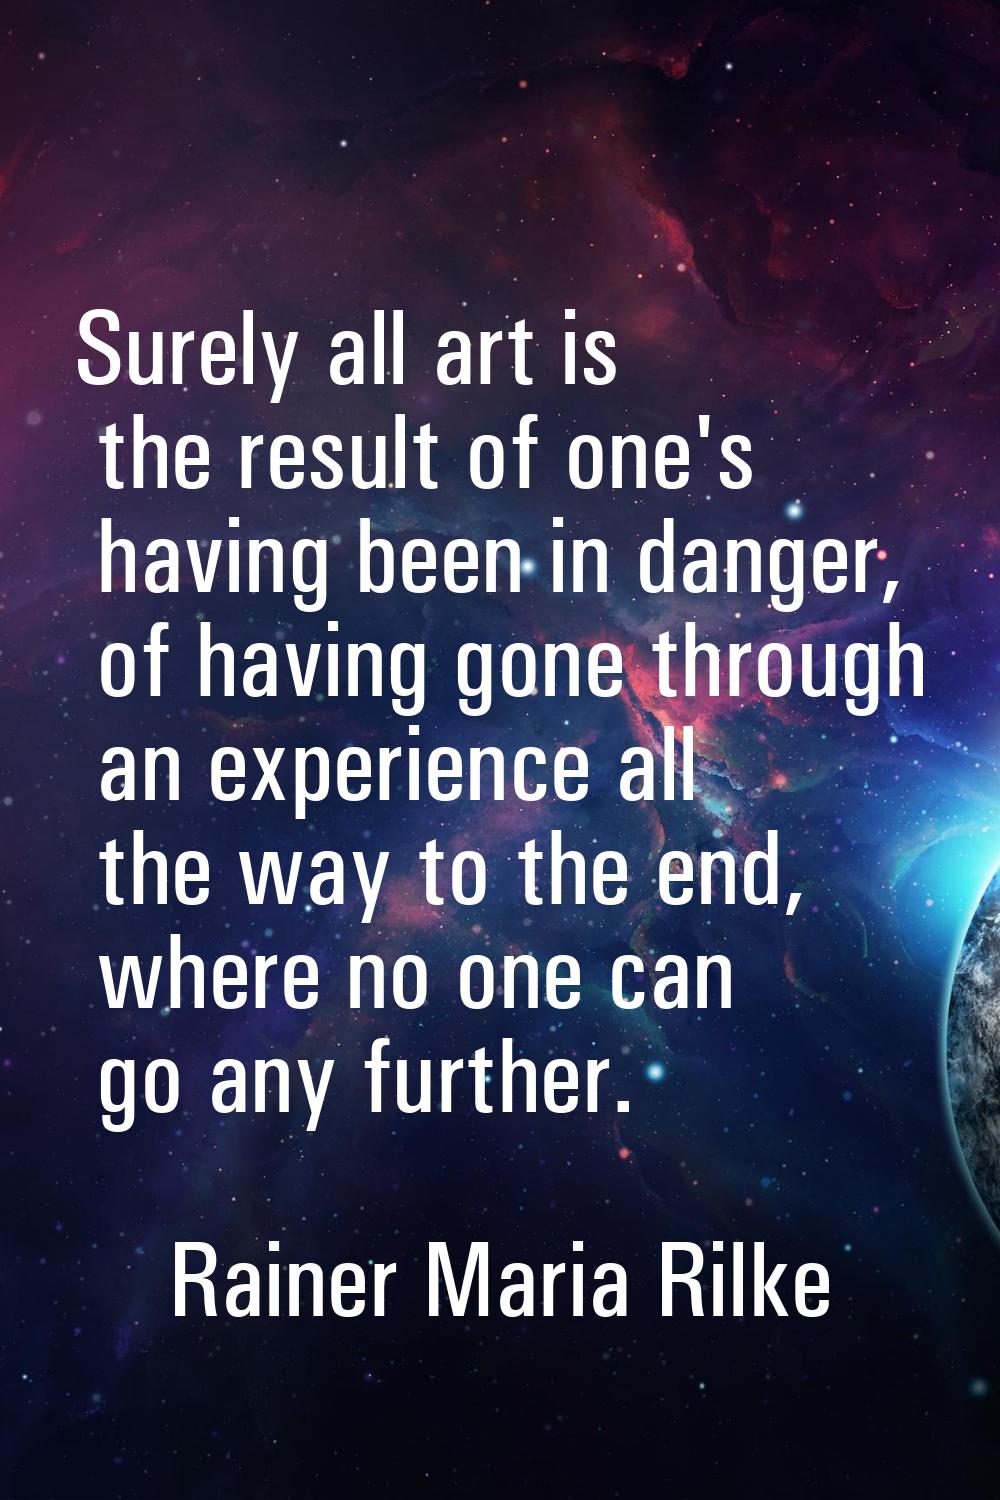 Surely all art is the result of one's having been in danger, of having gone through an experience a